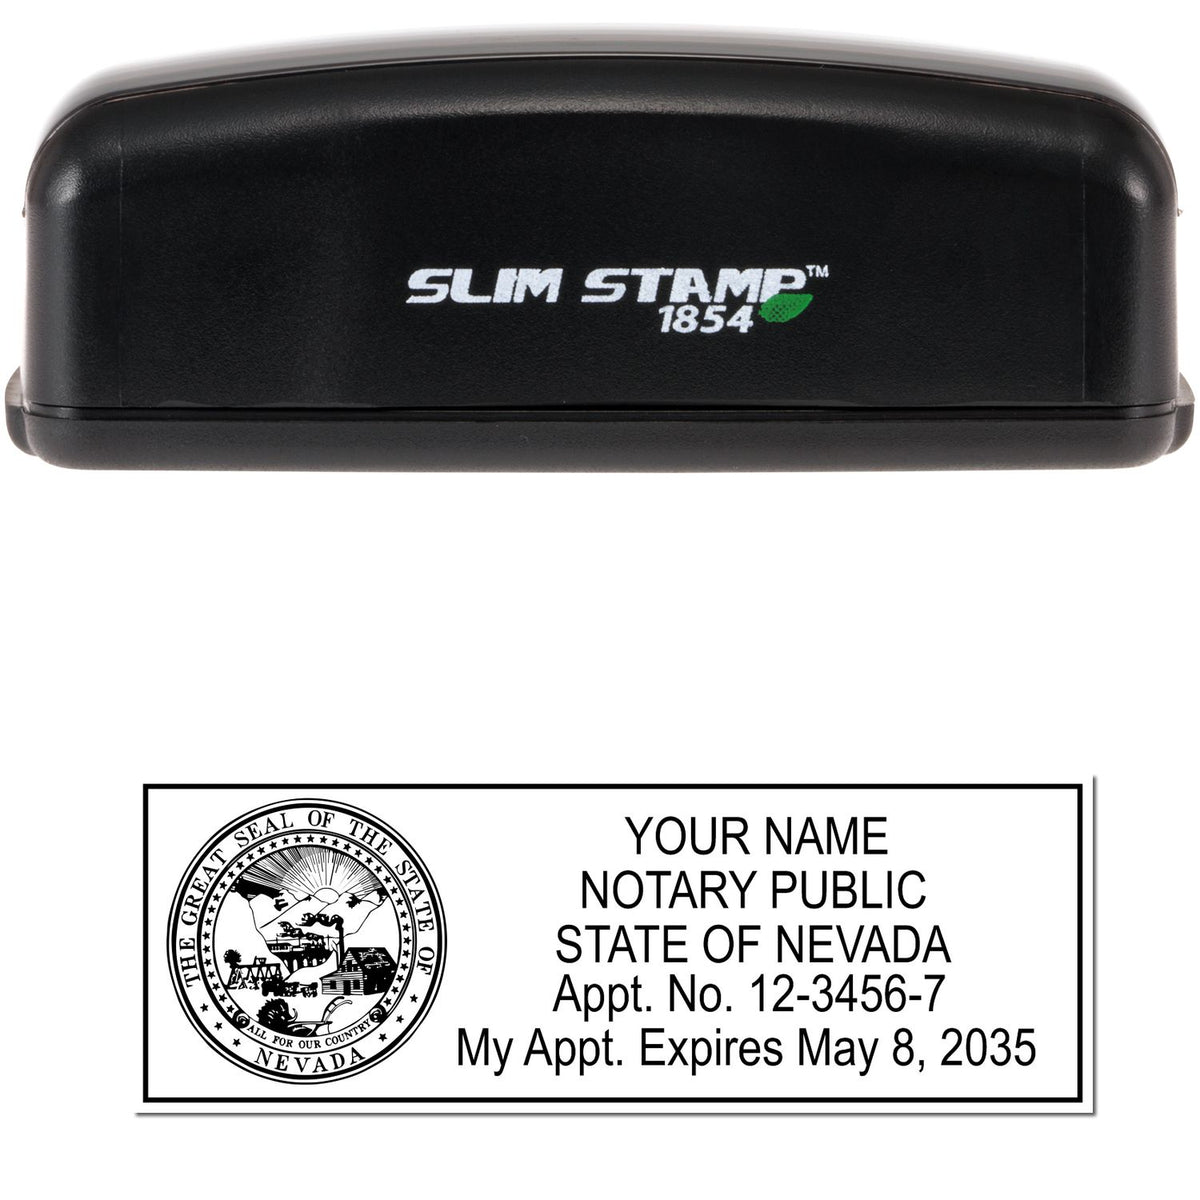 The main image for the Slim Pre-Inked State Seal Notary Stamp for Nevada depicting a sample of the imprint and electronic files